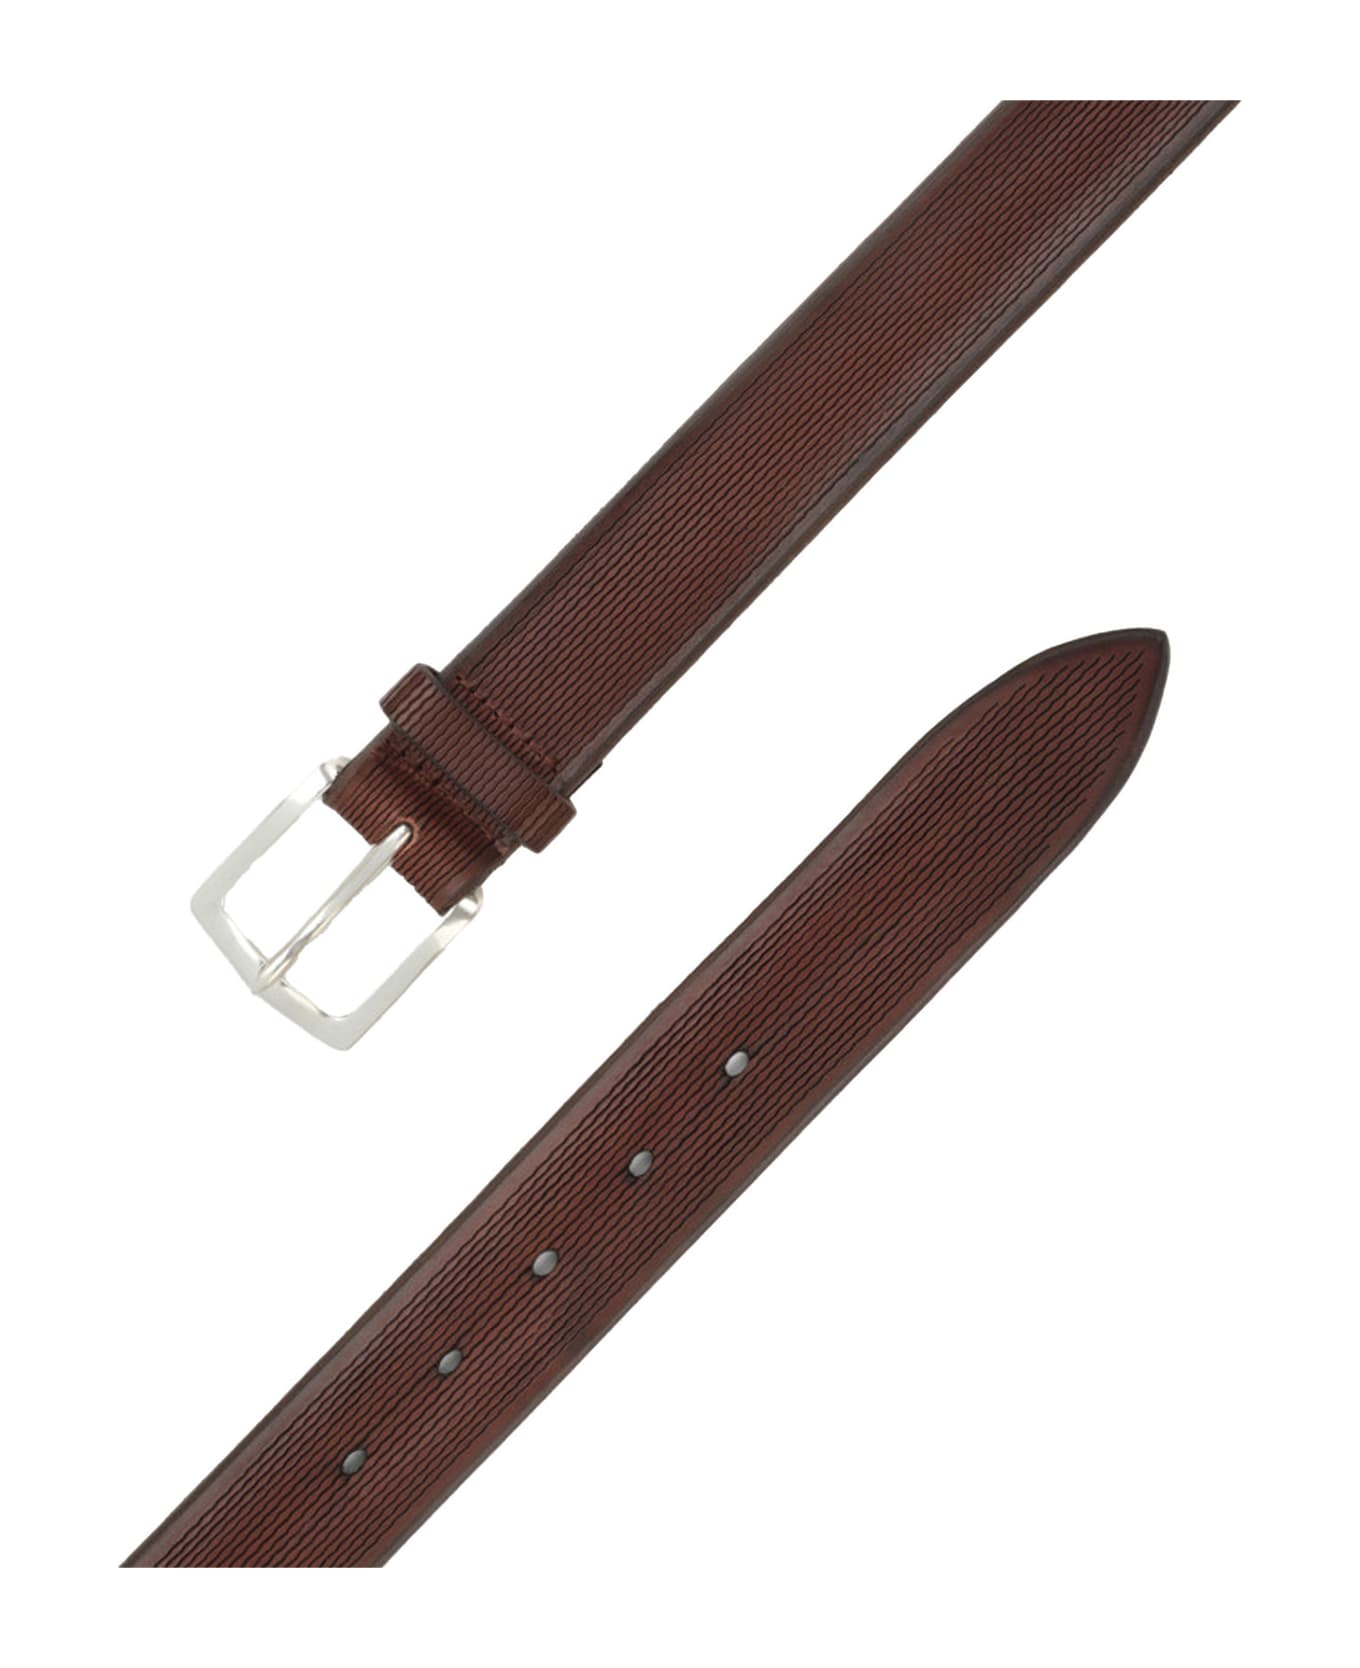 Orciani Burnt Blade Belt With Line Pattern - Brown